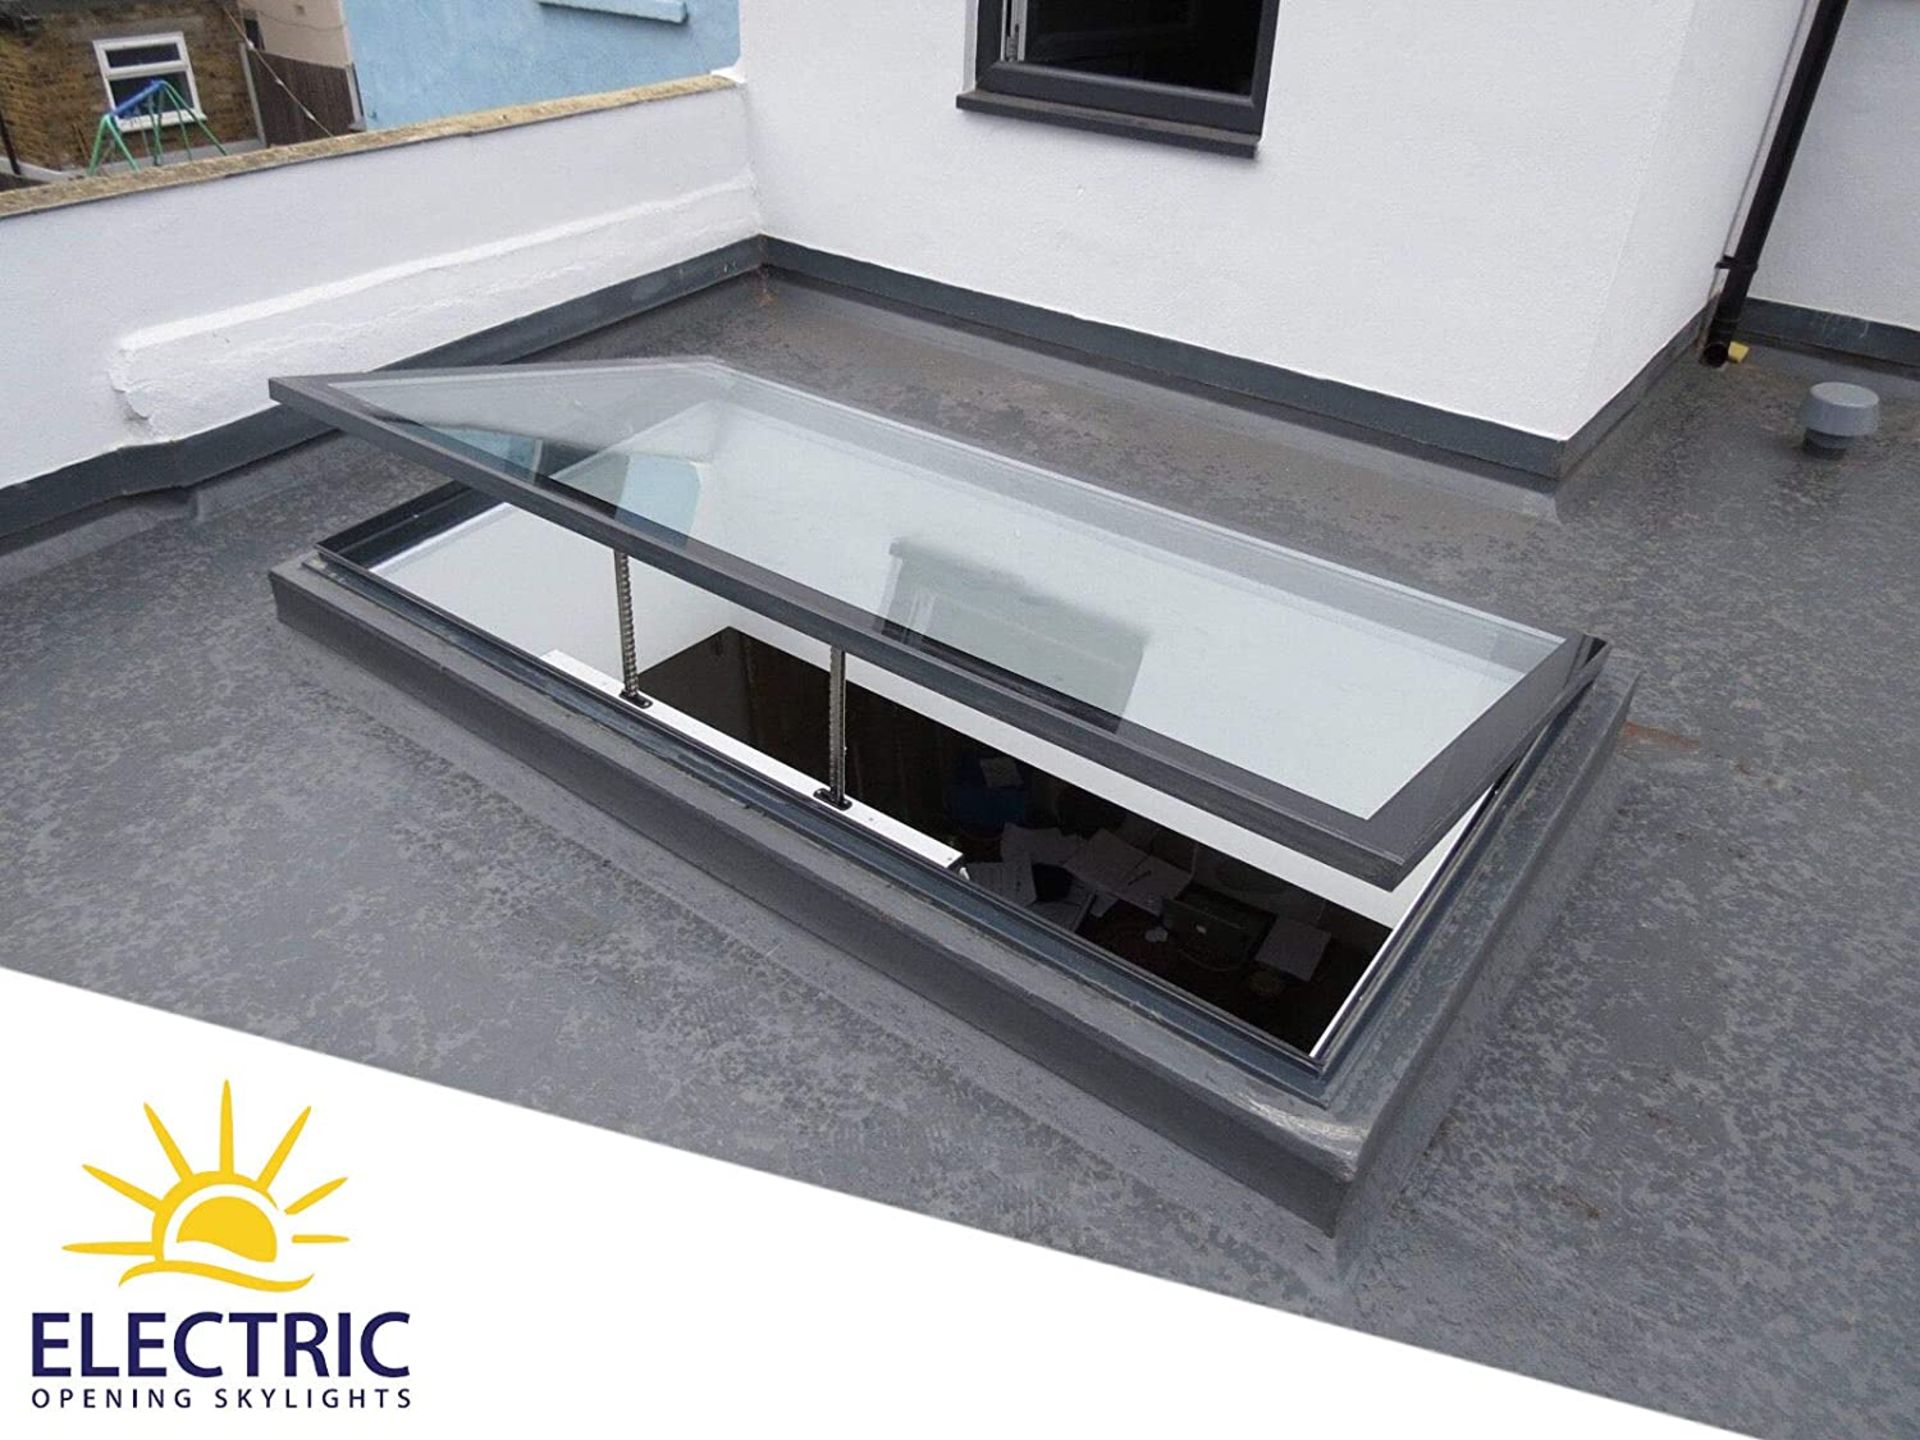 Panoroof (EOS)Electric Opening Skylight 1000x2000mm - Aluminiun Frame Double Glazed Laminated Self-